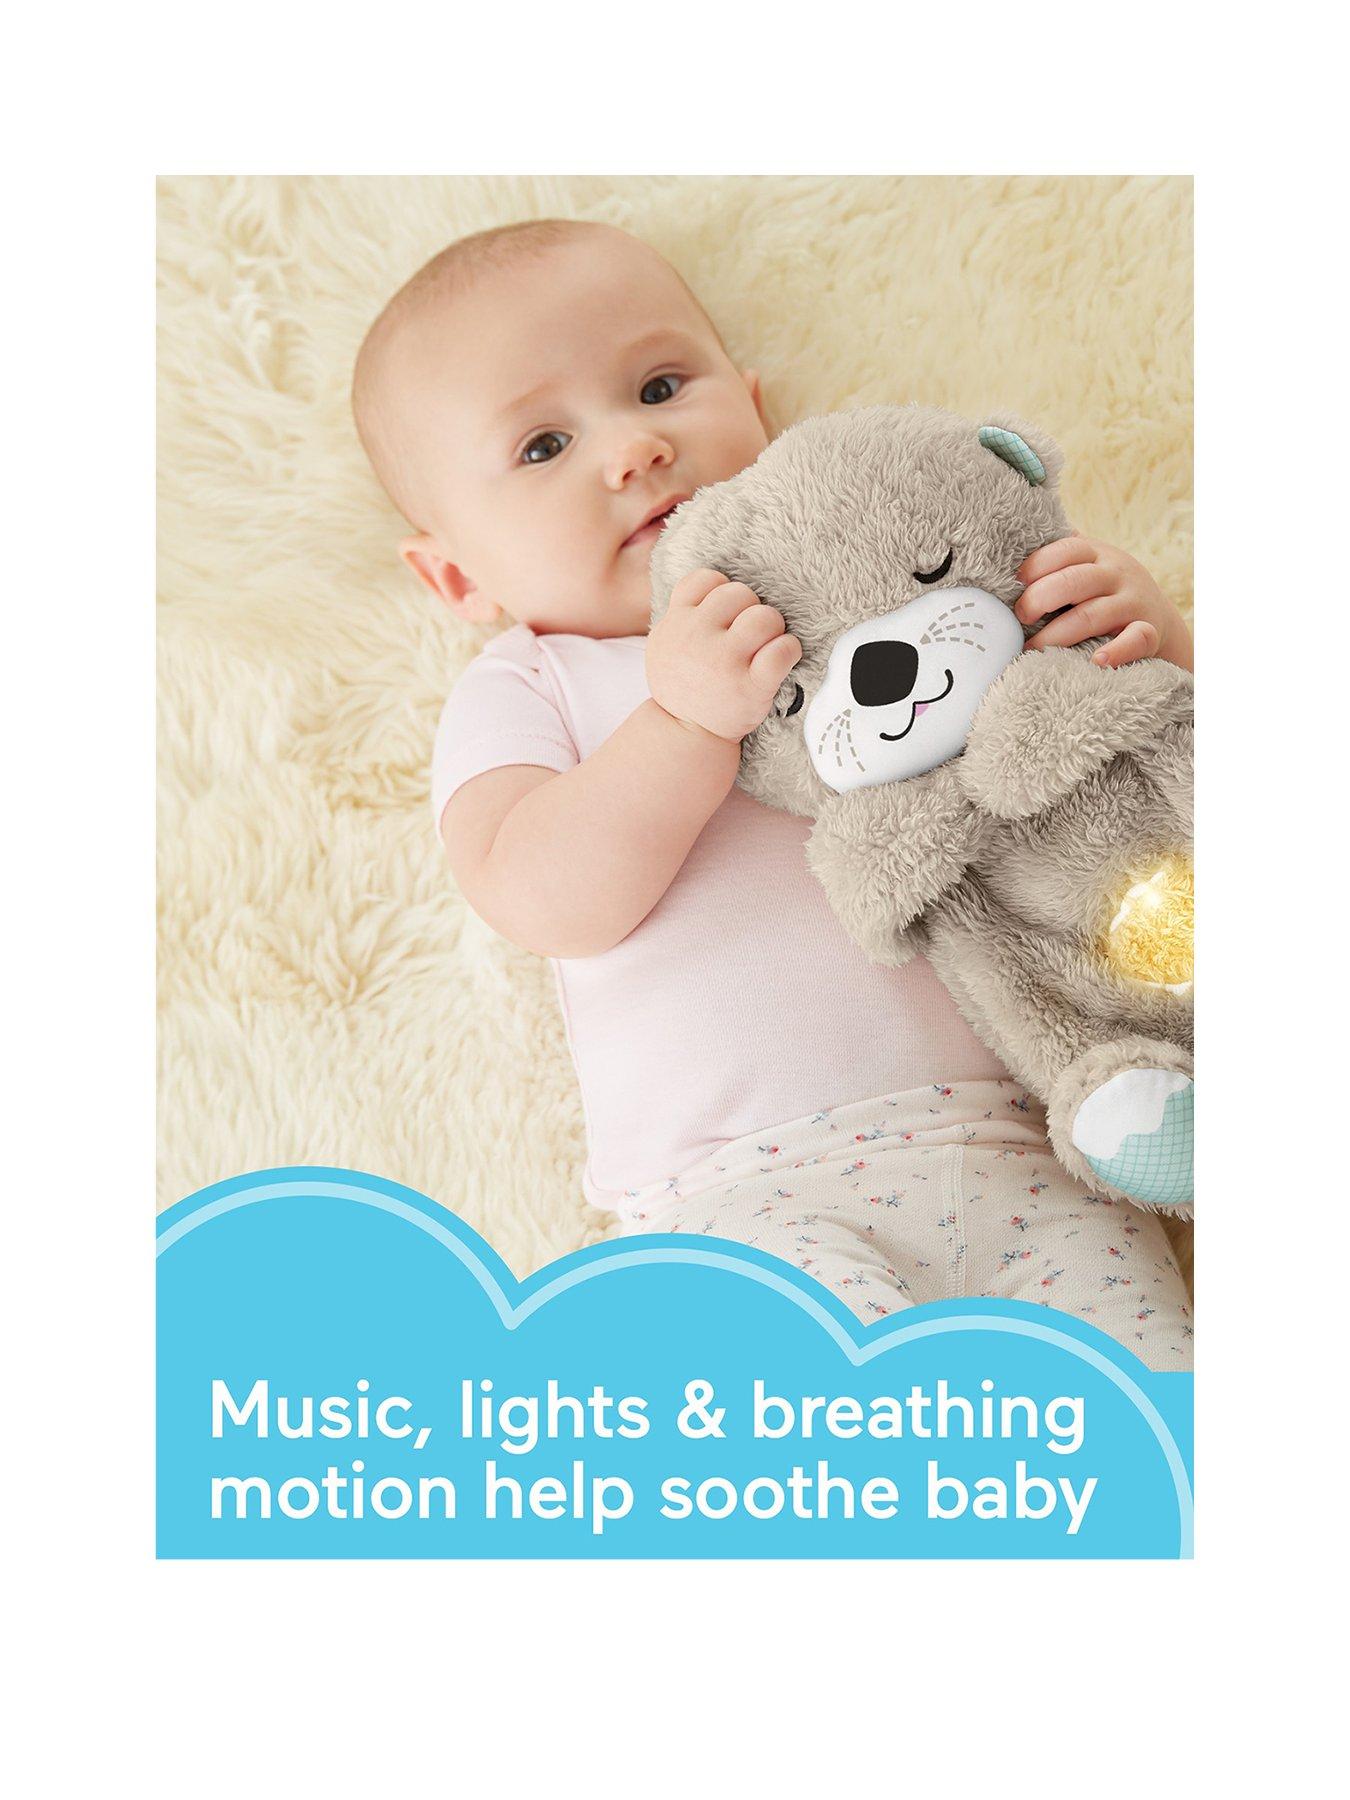 Fisher Price - Soothe ‘N Snuggle Otter